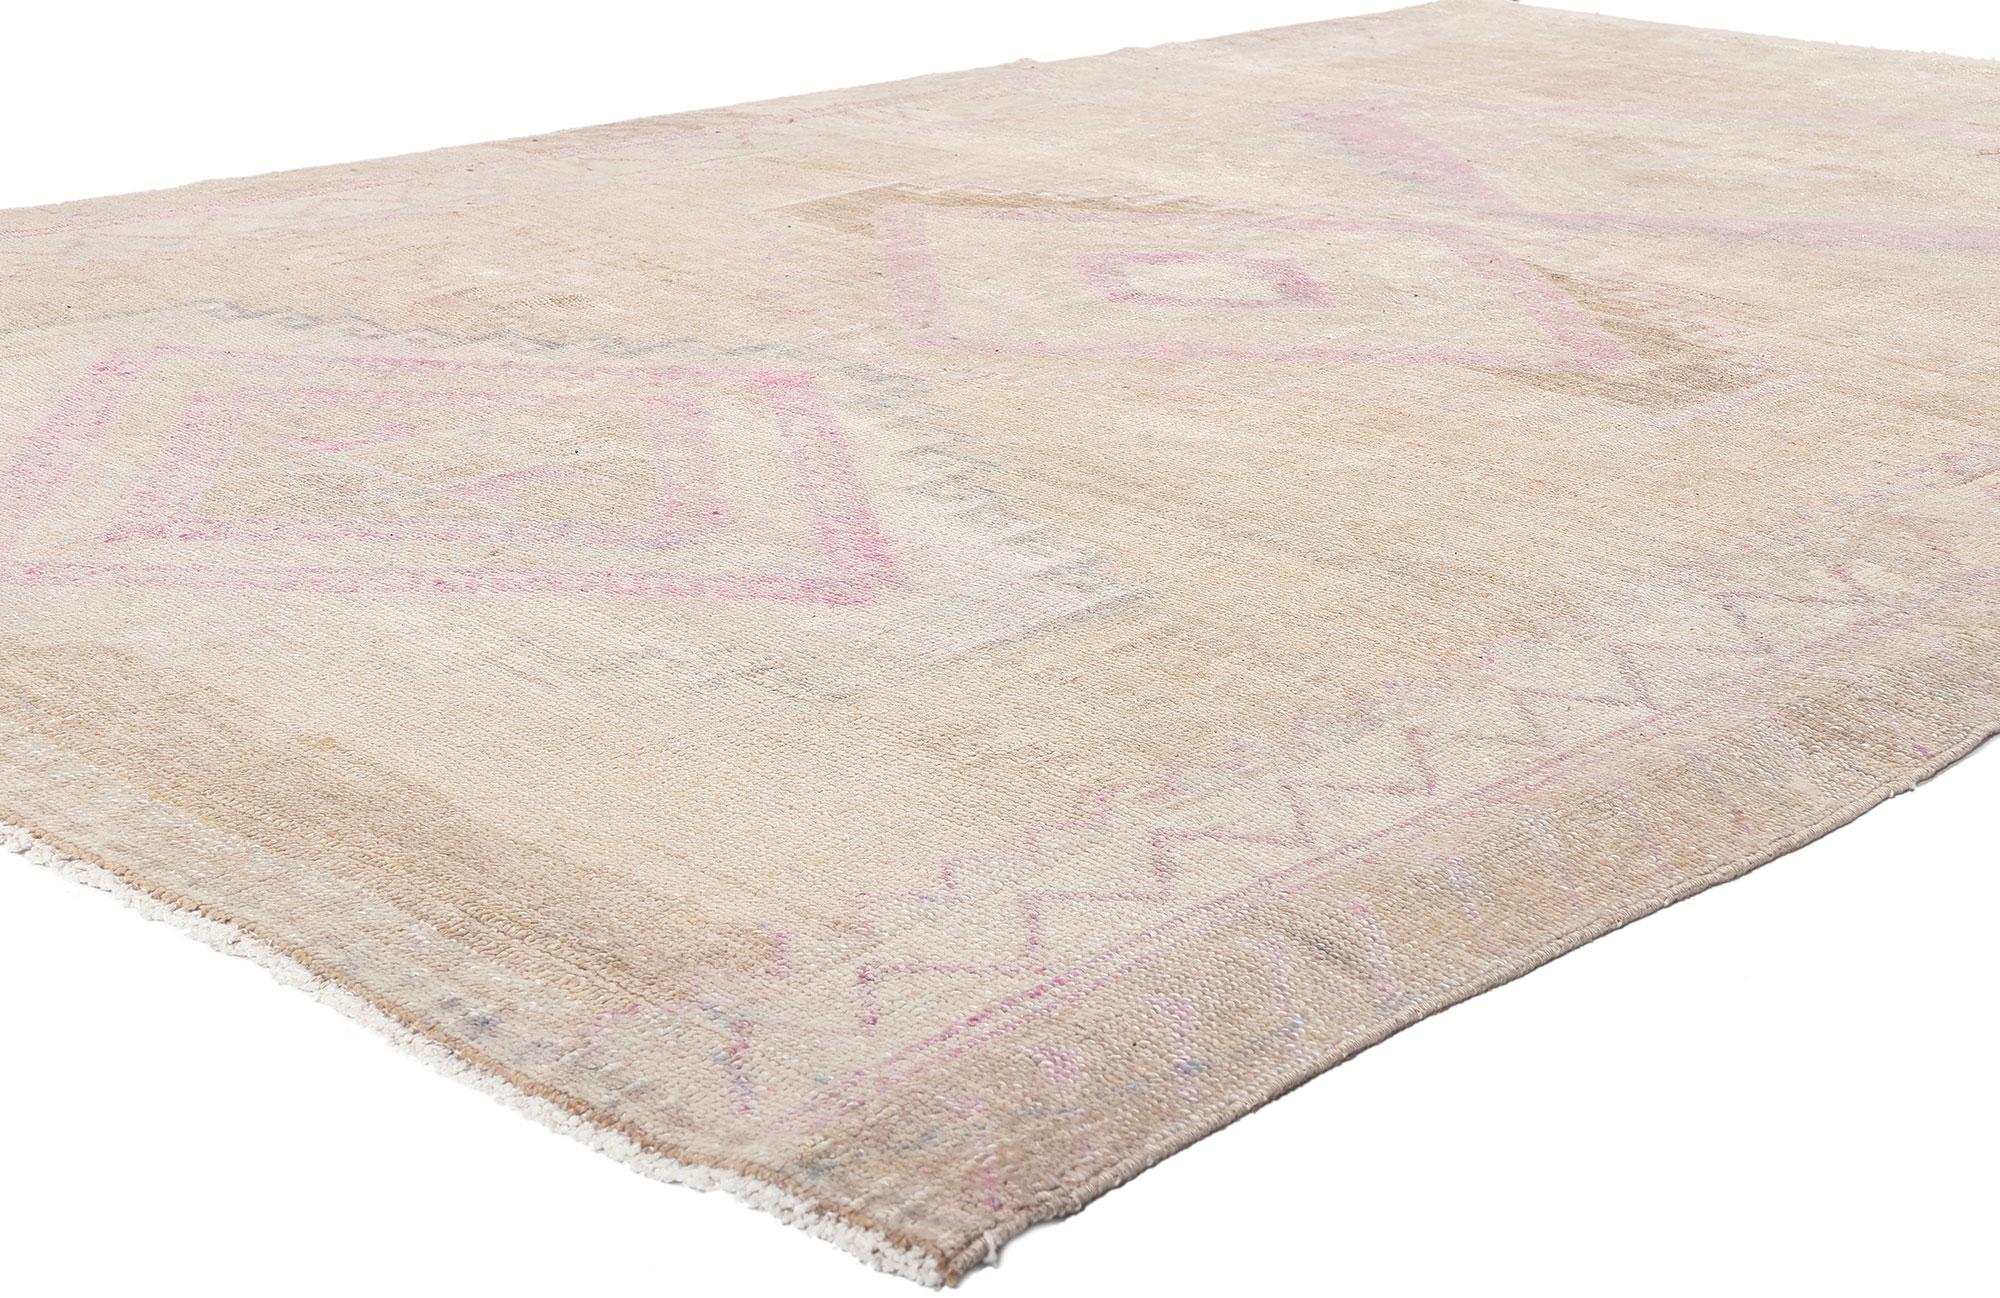 53869 Muted Vintage Turkish Oushak Rug, 06'08 x 09'06. 
Reflecting elements of Shibui with incredible detail and texture, this hand knotted wool vintage Turkish Oushak rug is simple, subtle, and a captivating vision of woven beauty. The faded